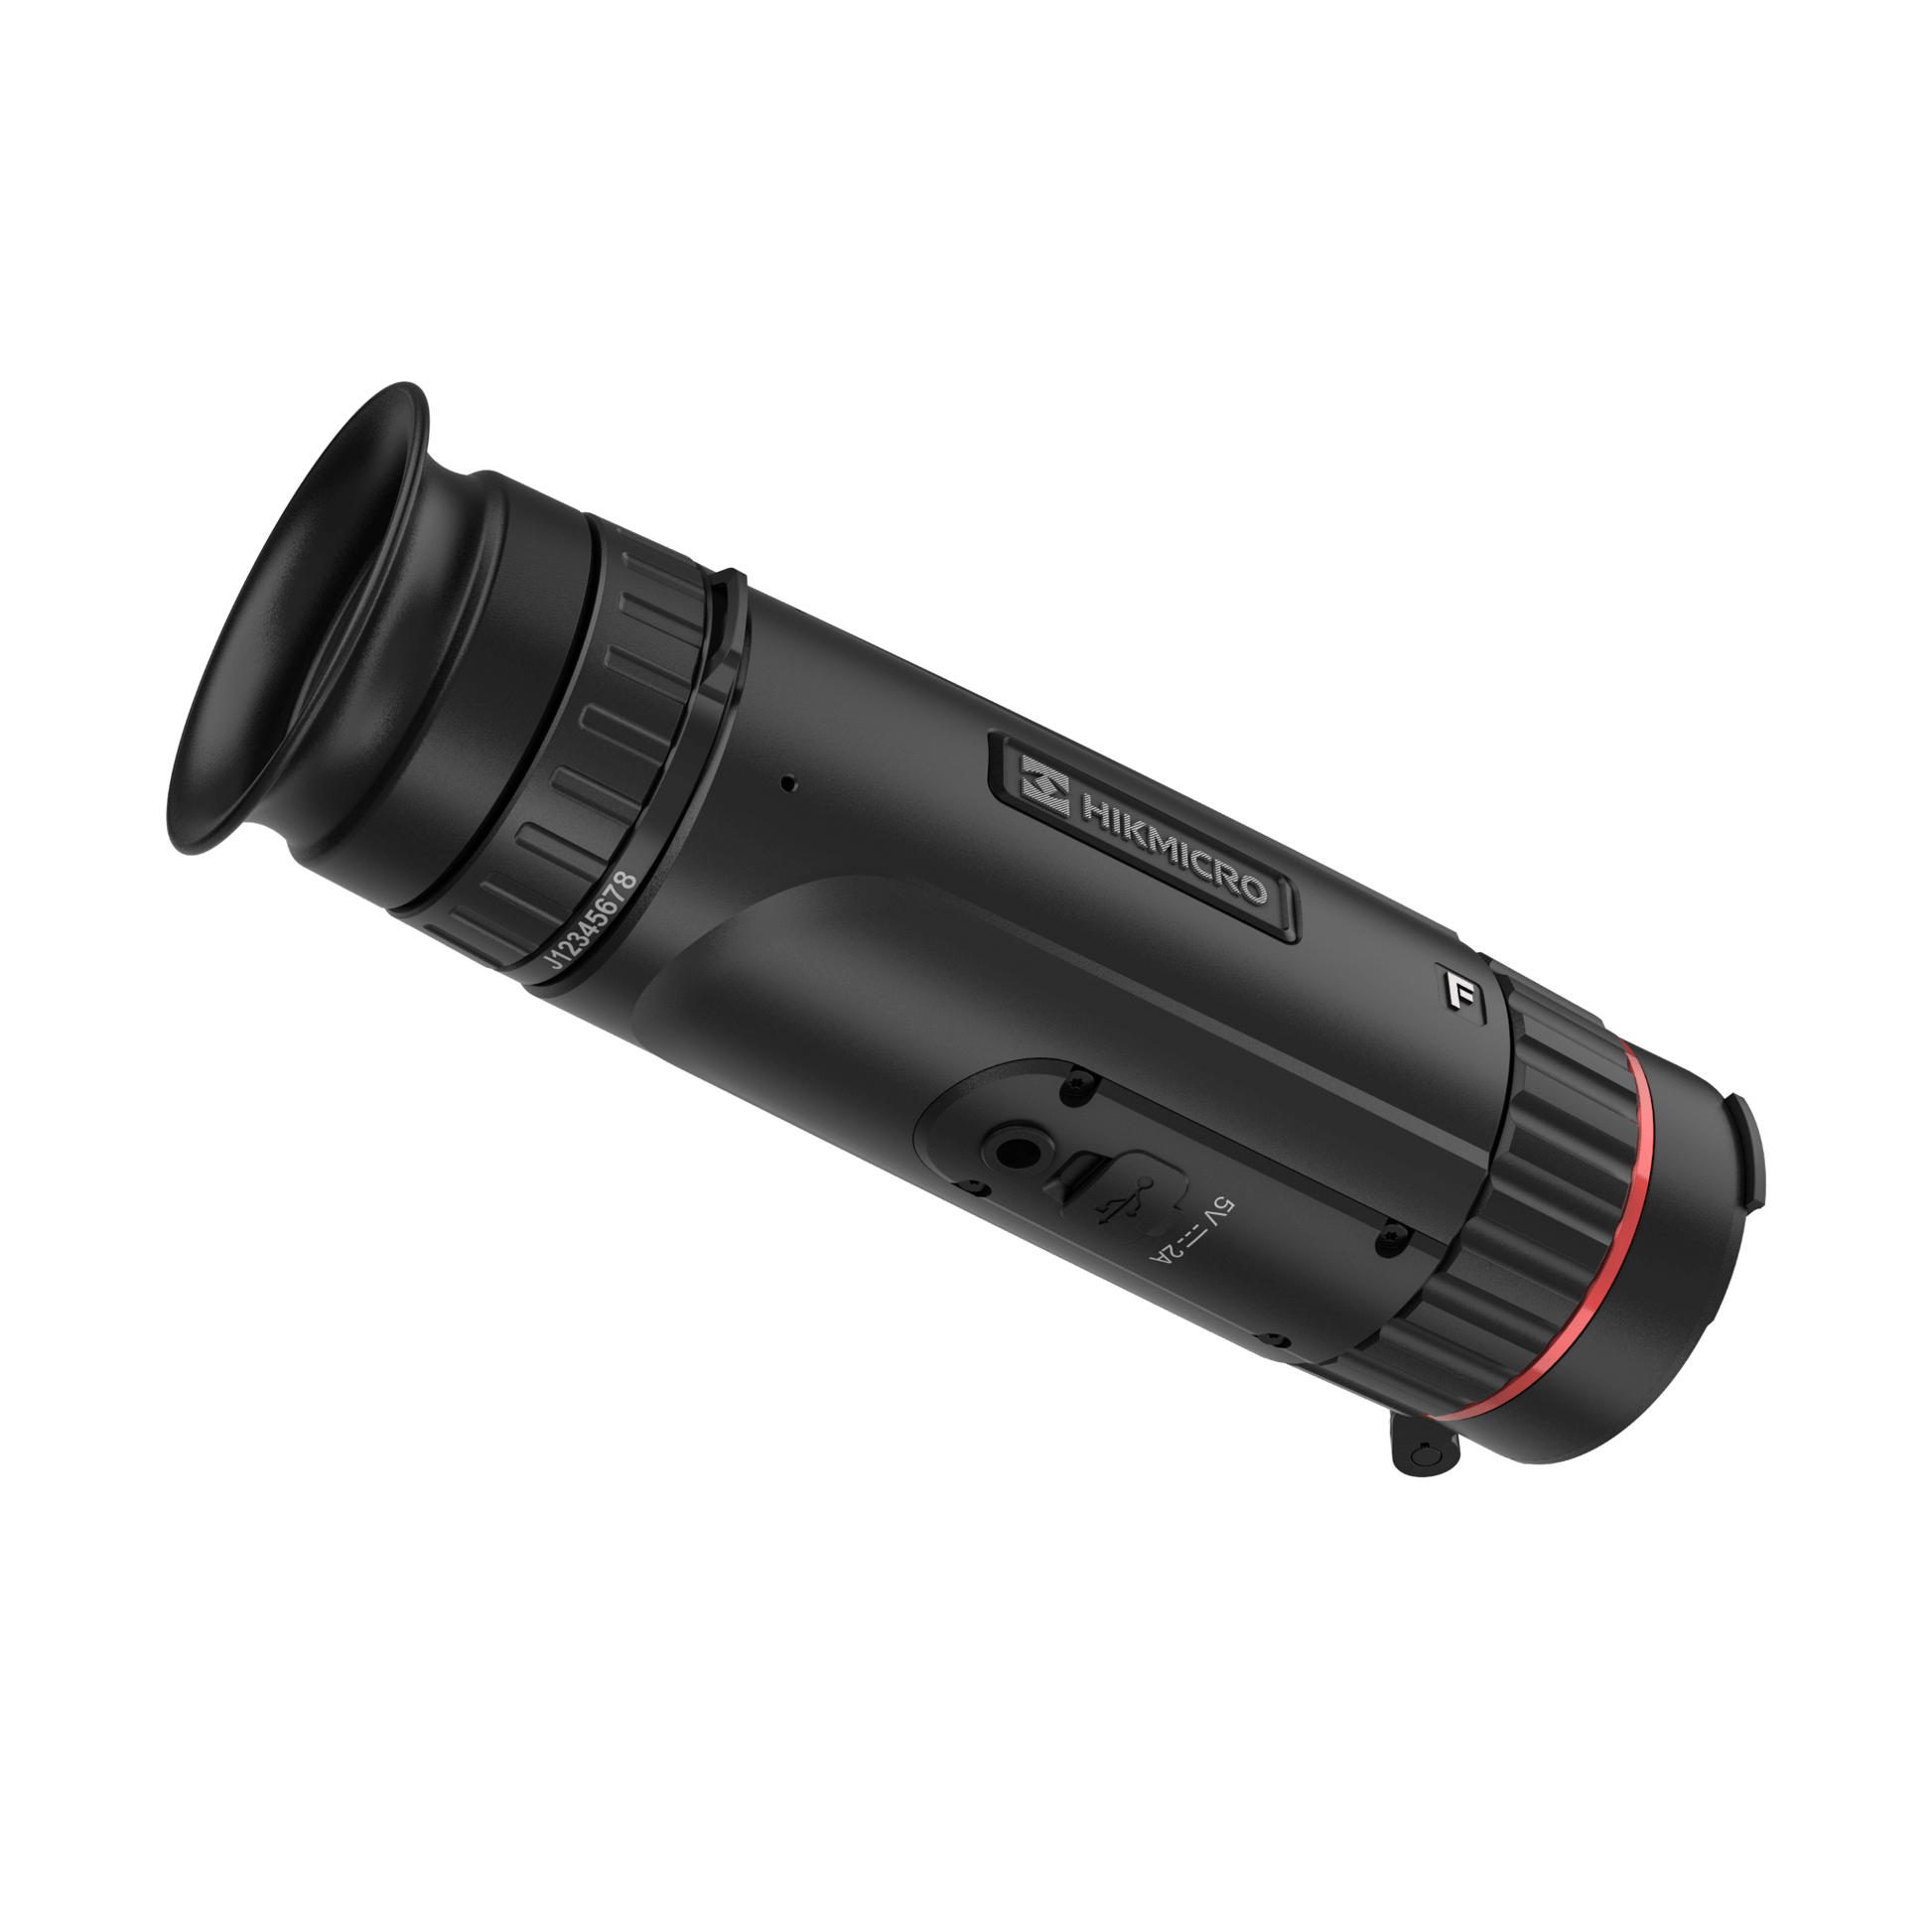 HikMicro Thermal Imaging Monocular for Sale - HikMicro Falcon Series FQ35 - HM-TS43-35XG_W-FH35 -  Rear Right View From Below